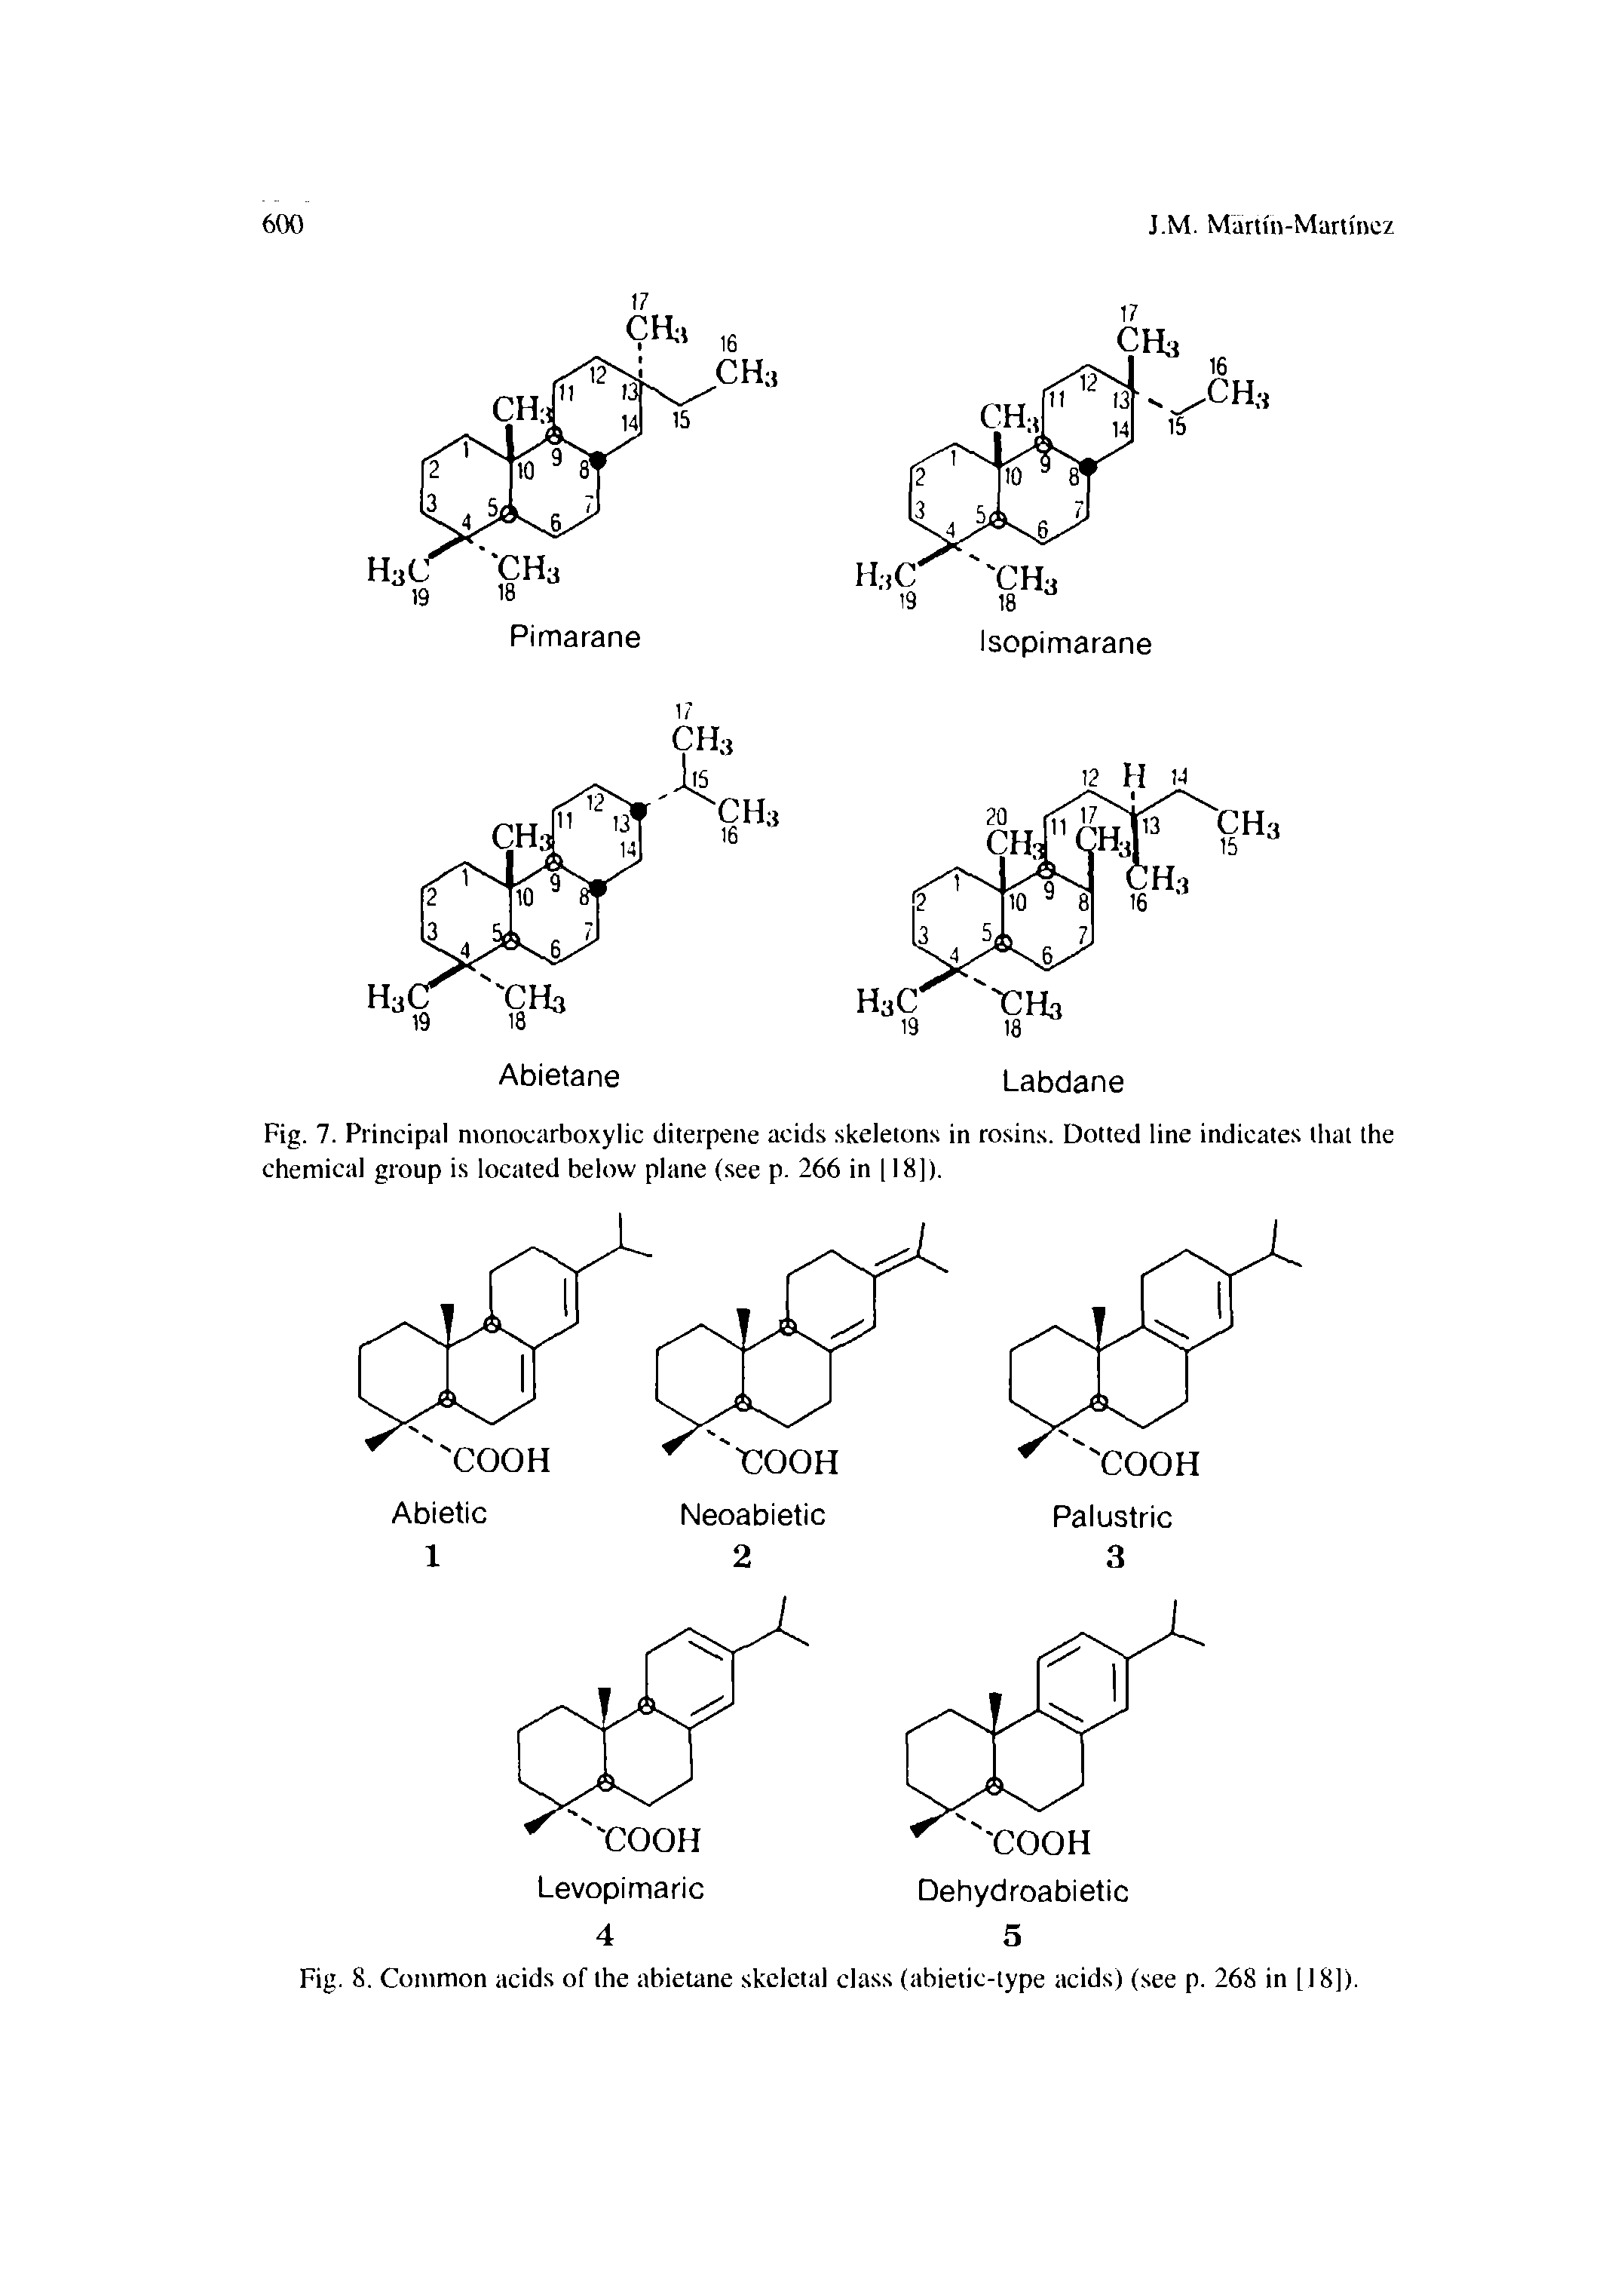 Fig. 8. Common acids of the abietane skeletal class (abietic-iype acids) (see p. 268 in [18]).